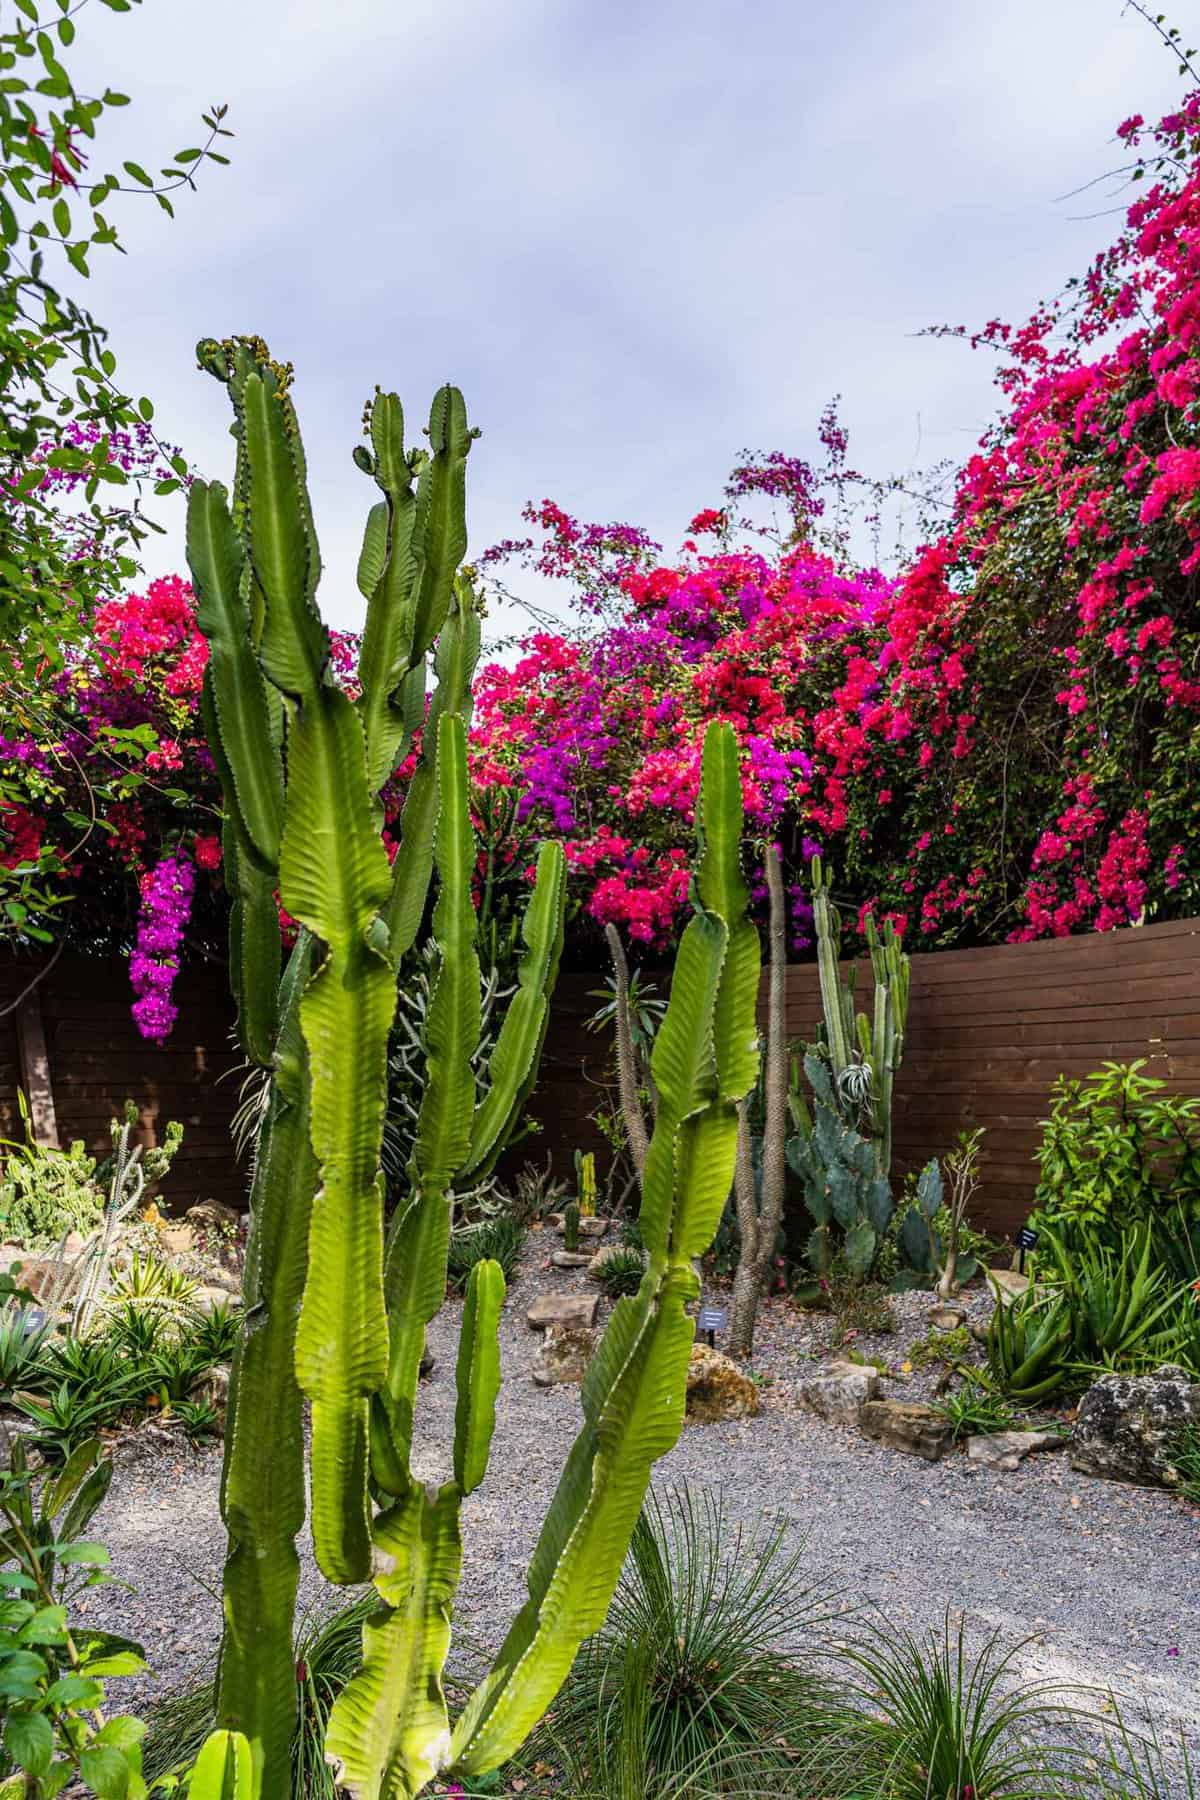 Cacti and flowers in a garden in St. Petersburg Romantic Things to Do Date Ideas Couples